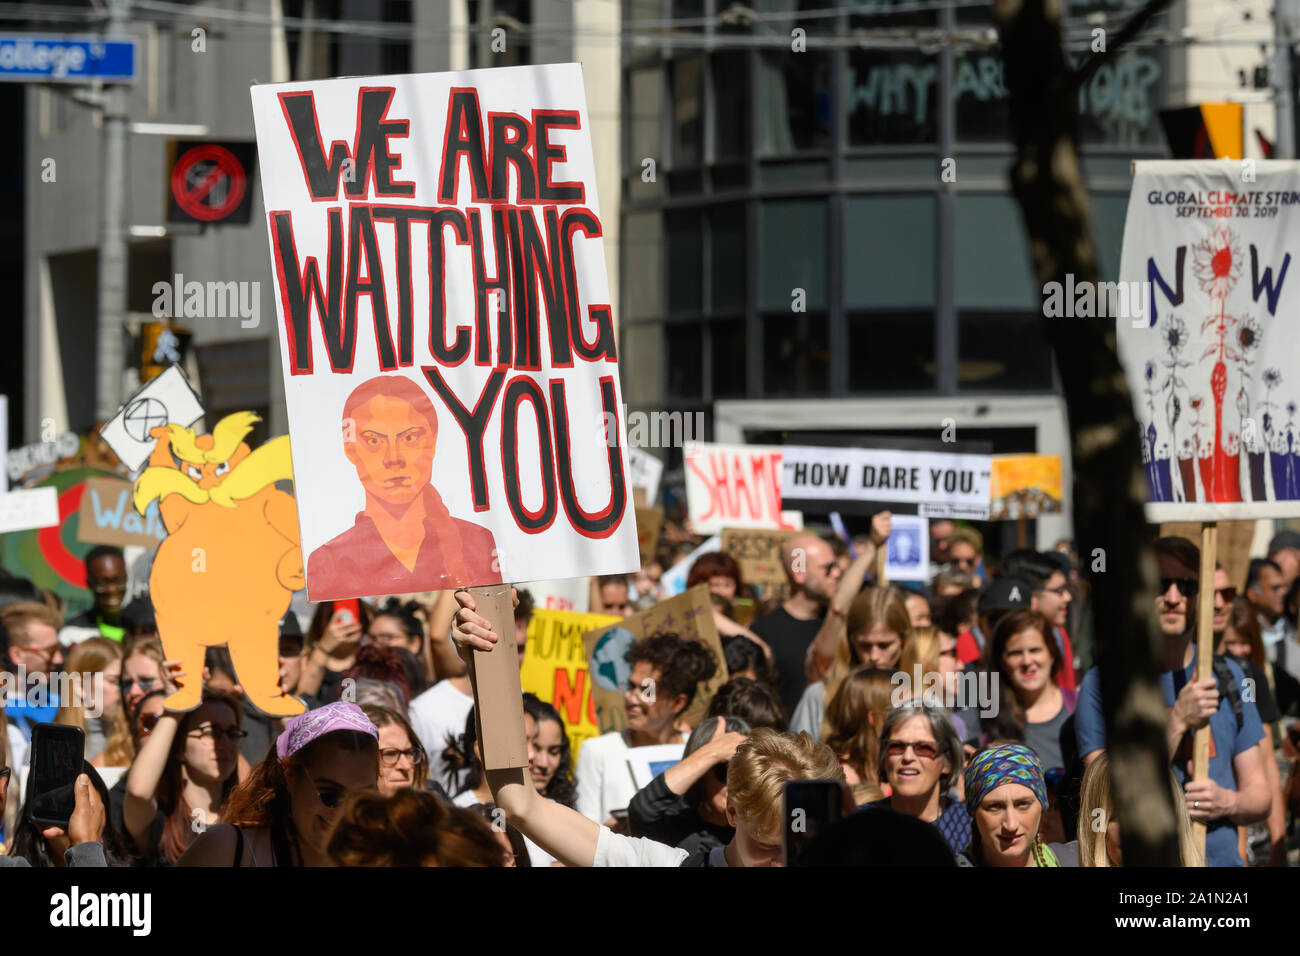 A demonstrator marches with a sign featuring Greta Thunberg during the Toronto Climate Strike with her 'How Dare You' quote visible on another sign. Stock Photo